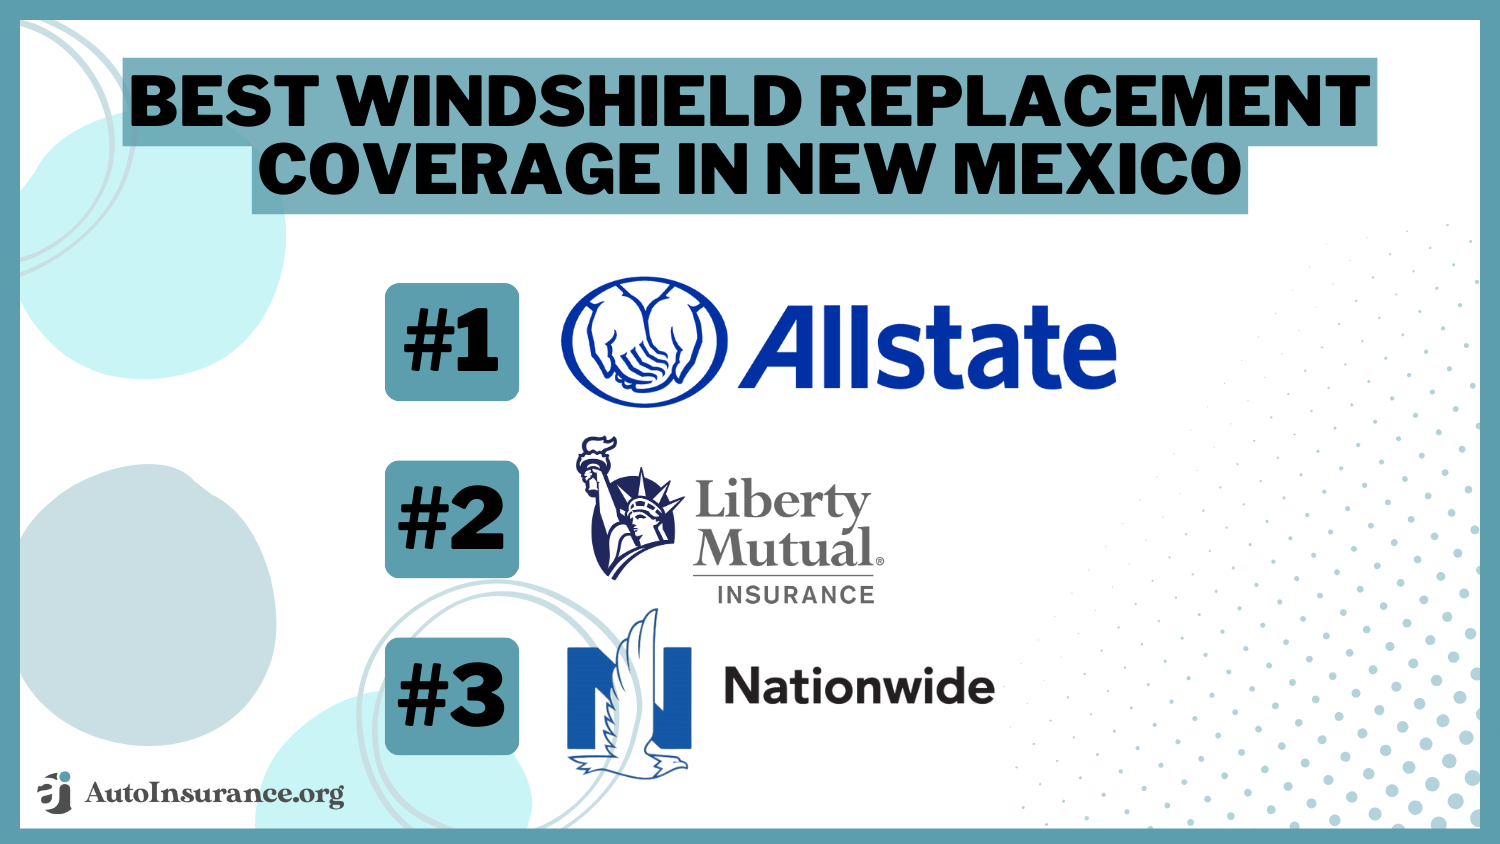 Best Windshield Replacement Coverage in New Mexico: Allstate, Liberty Mutual, and Nationwide